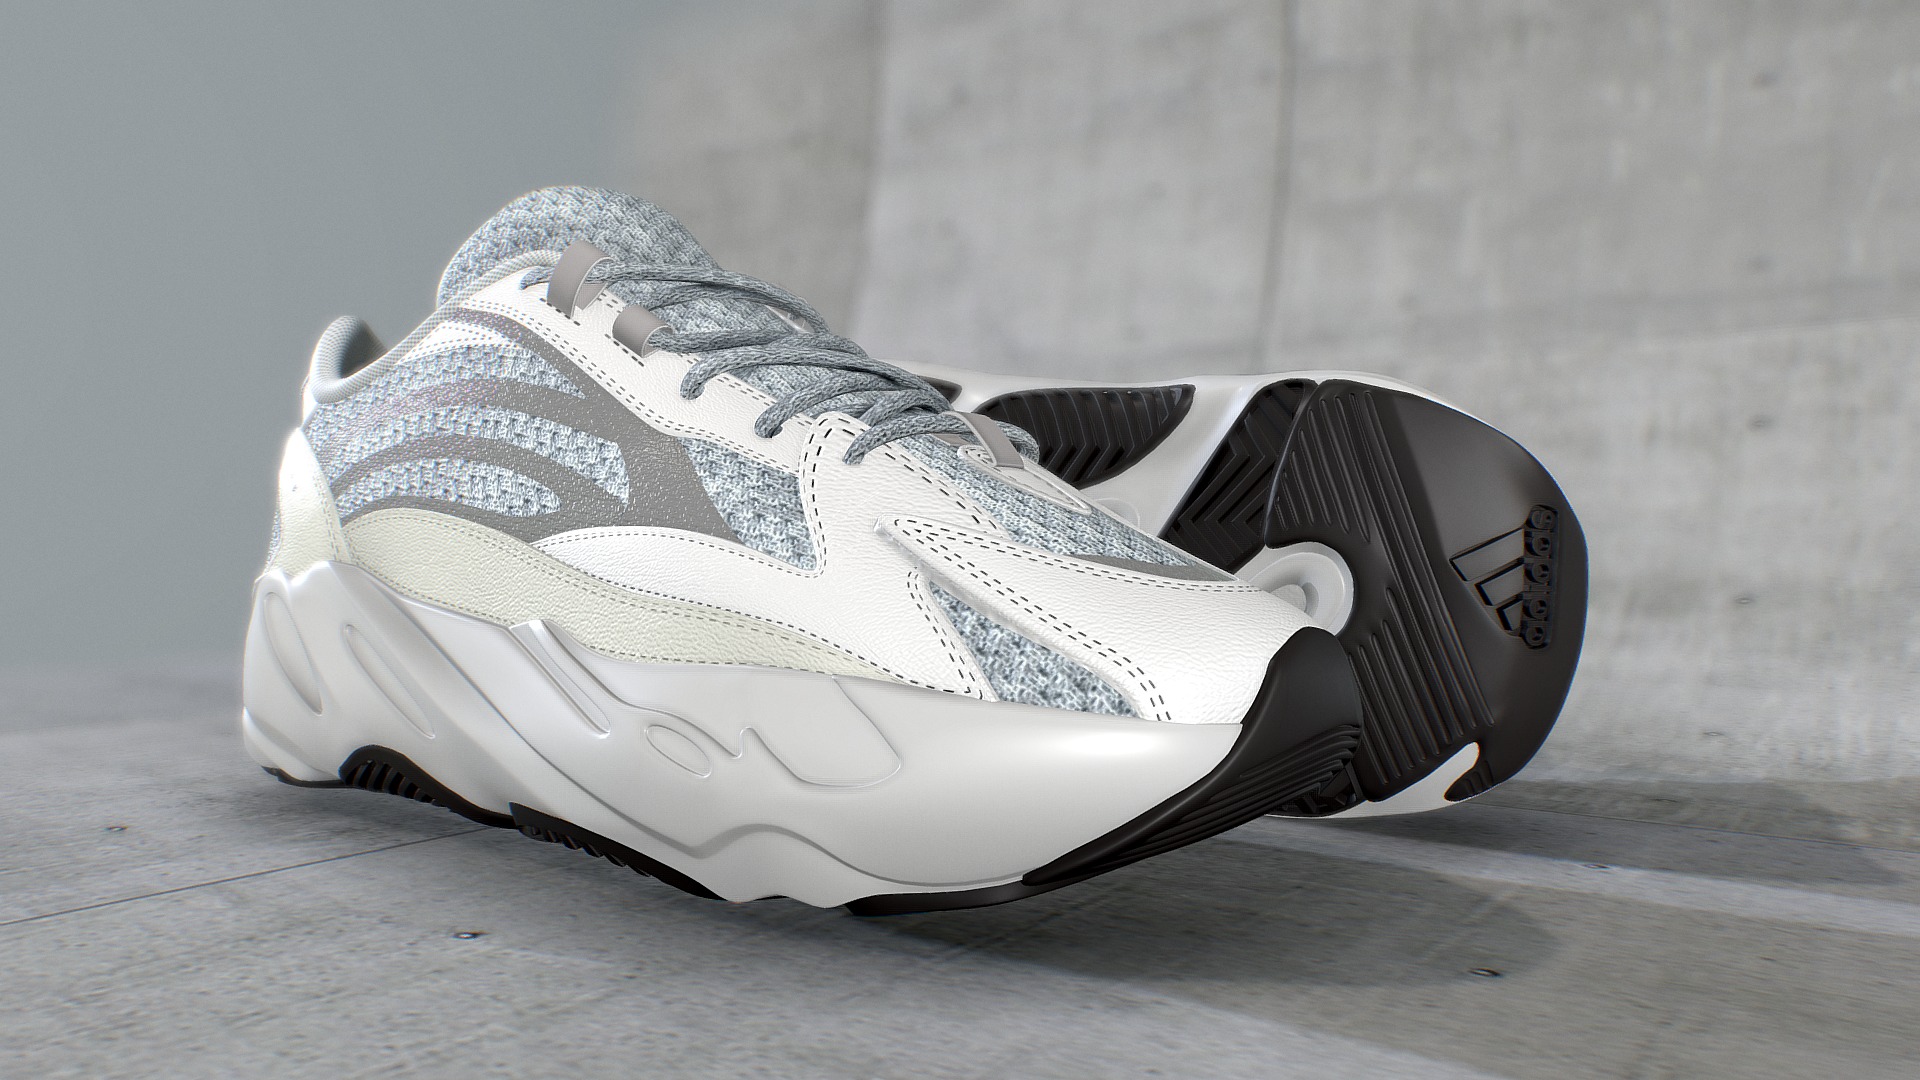 3D model Adidas Yeezy Boost 700 V2 Static – CGI - This is a 3D model of the Adidas Yeezy Boost 700 V2 Static - CGI. The 3D model is about a black and white shoe.